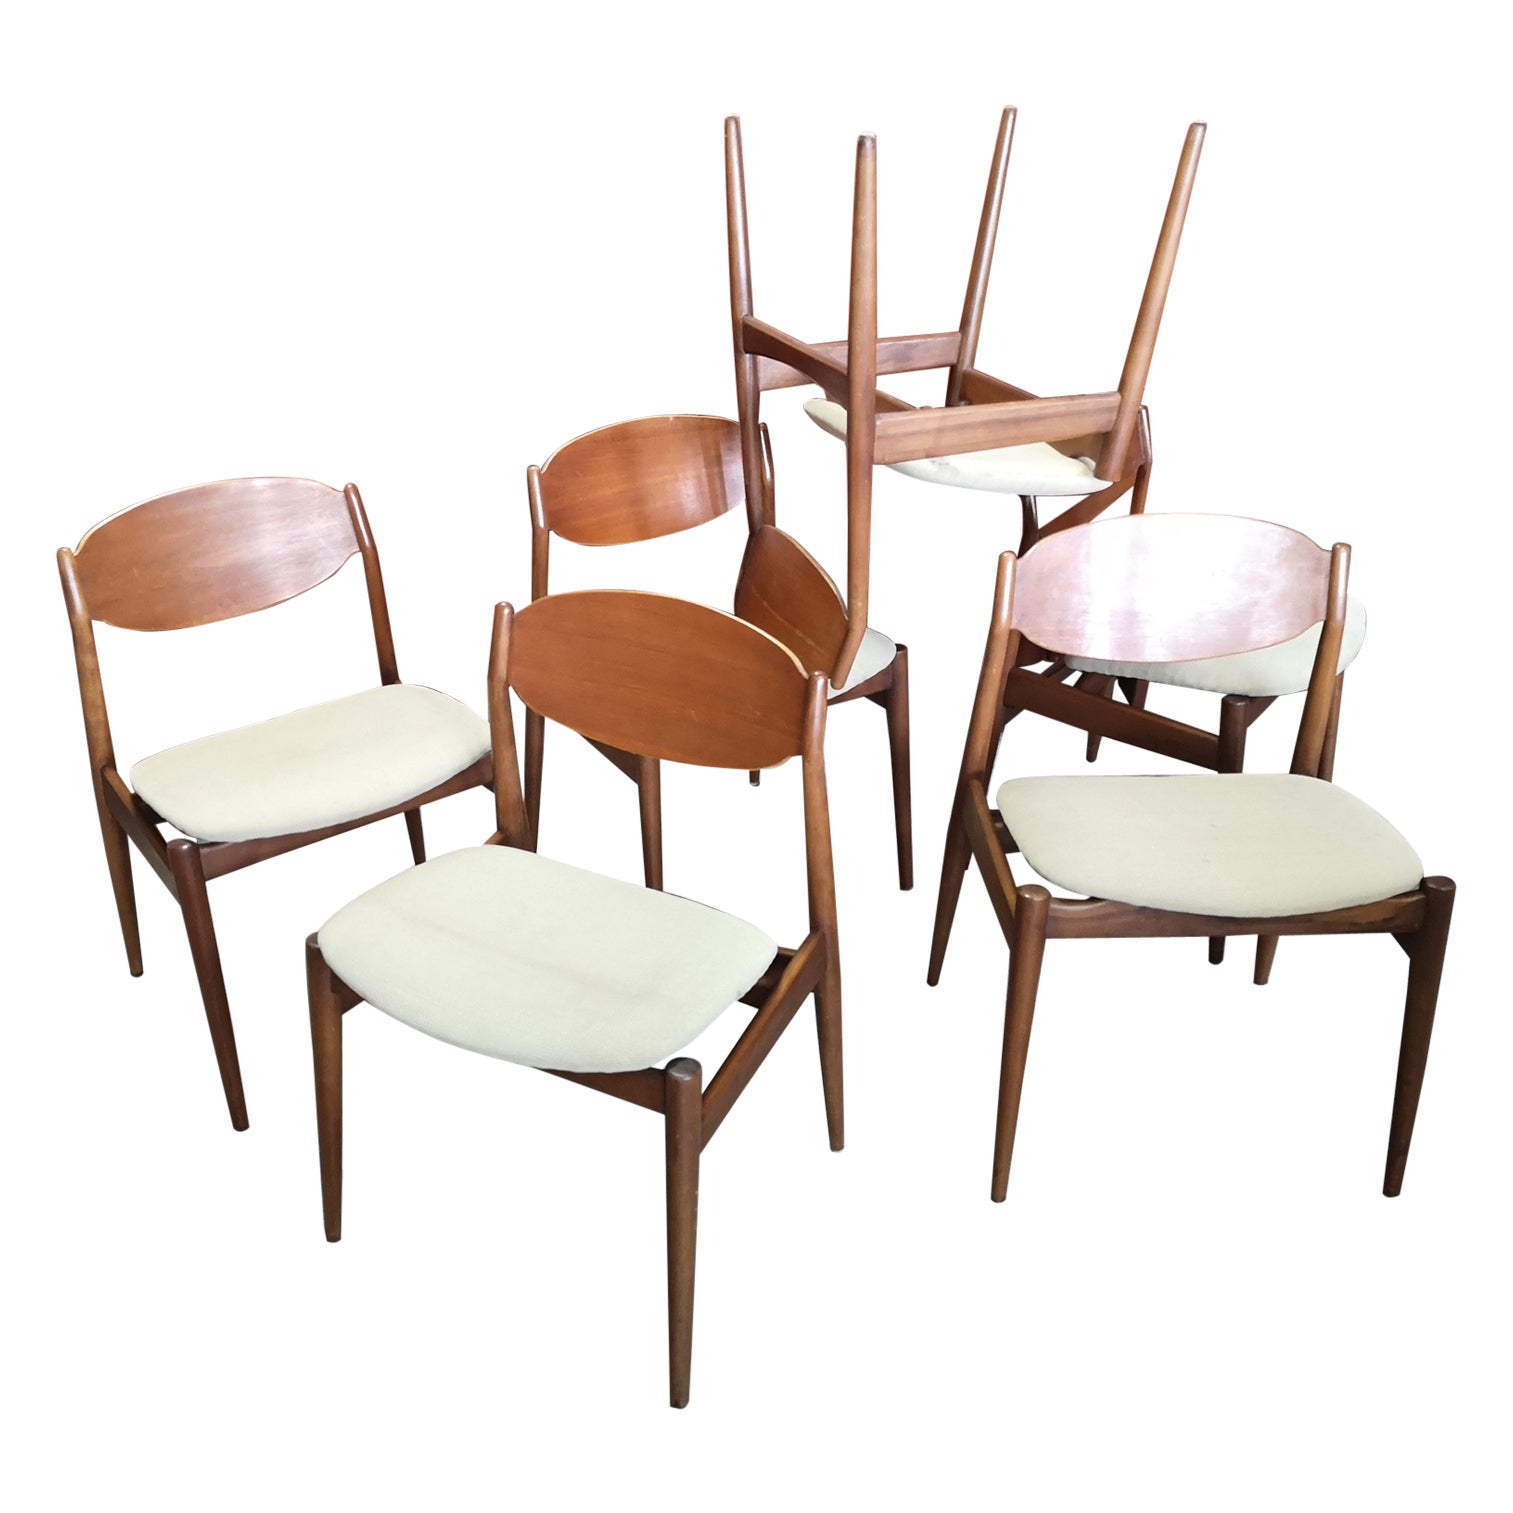 Set of 6 Chairs by Leonardo Fiori for ISA, Italy, 1960s For Sale